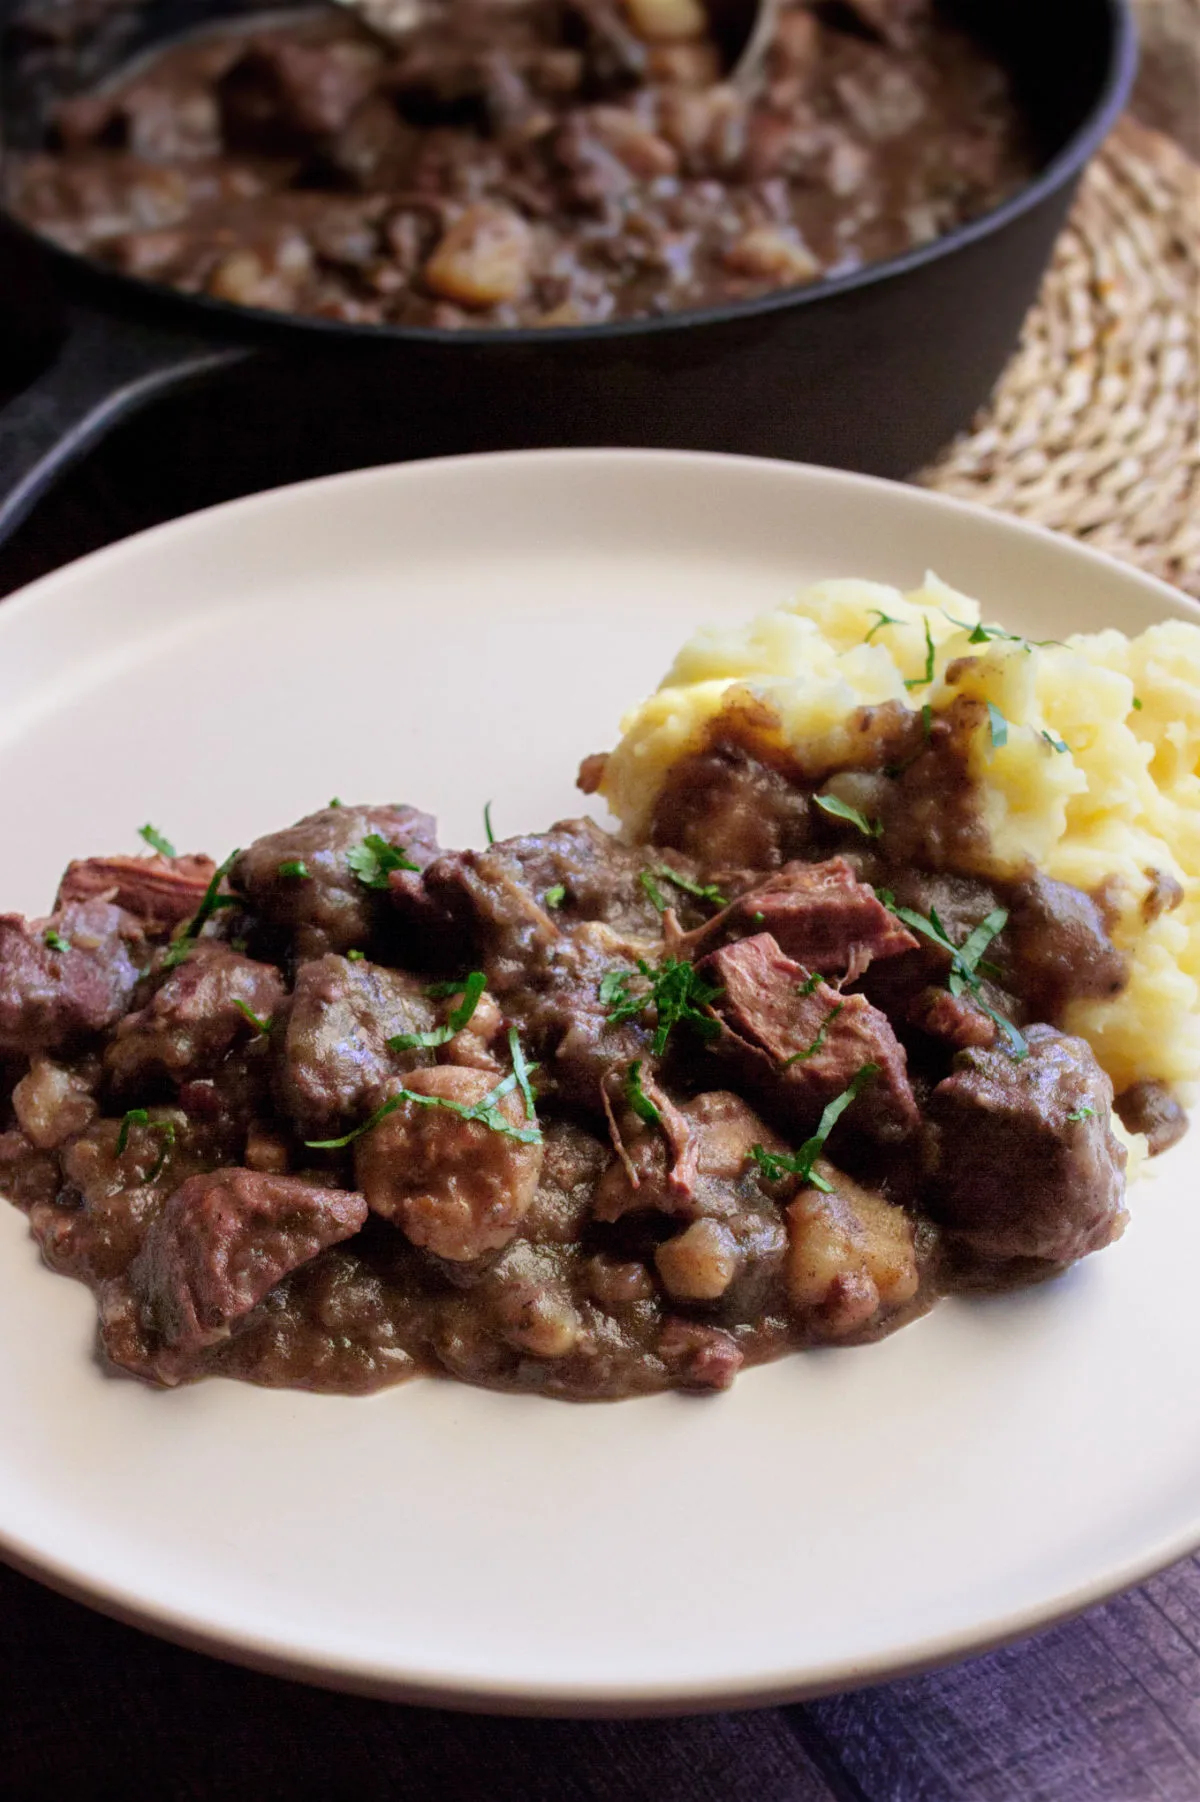 A plate of Catalan style beef stew with some mashed potato.